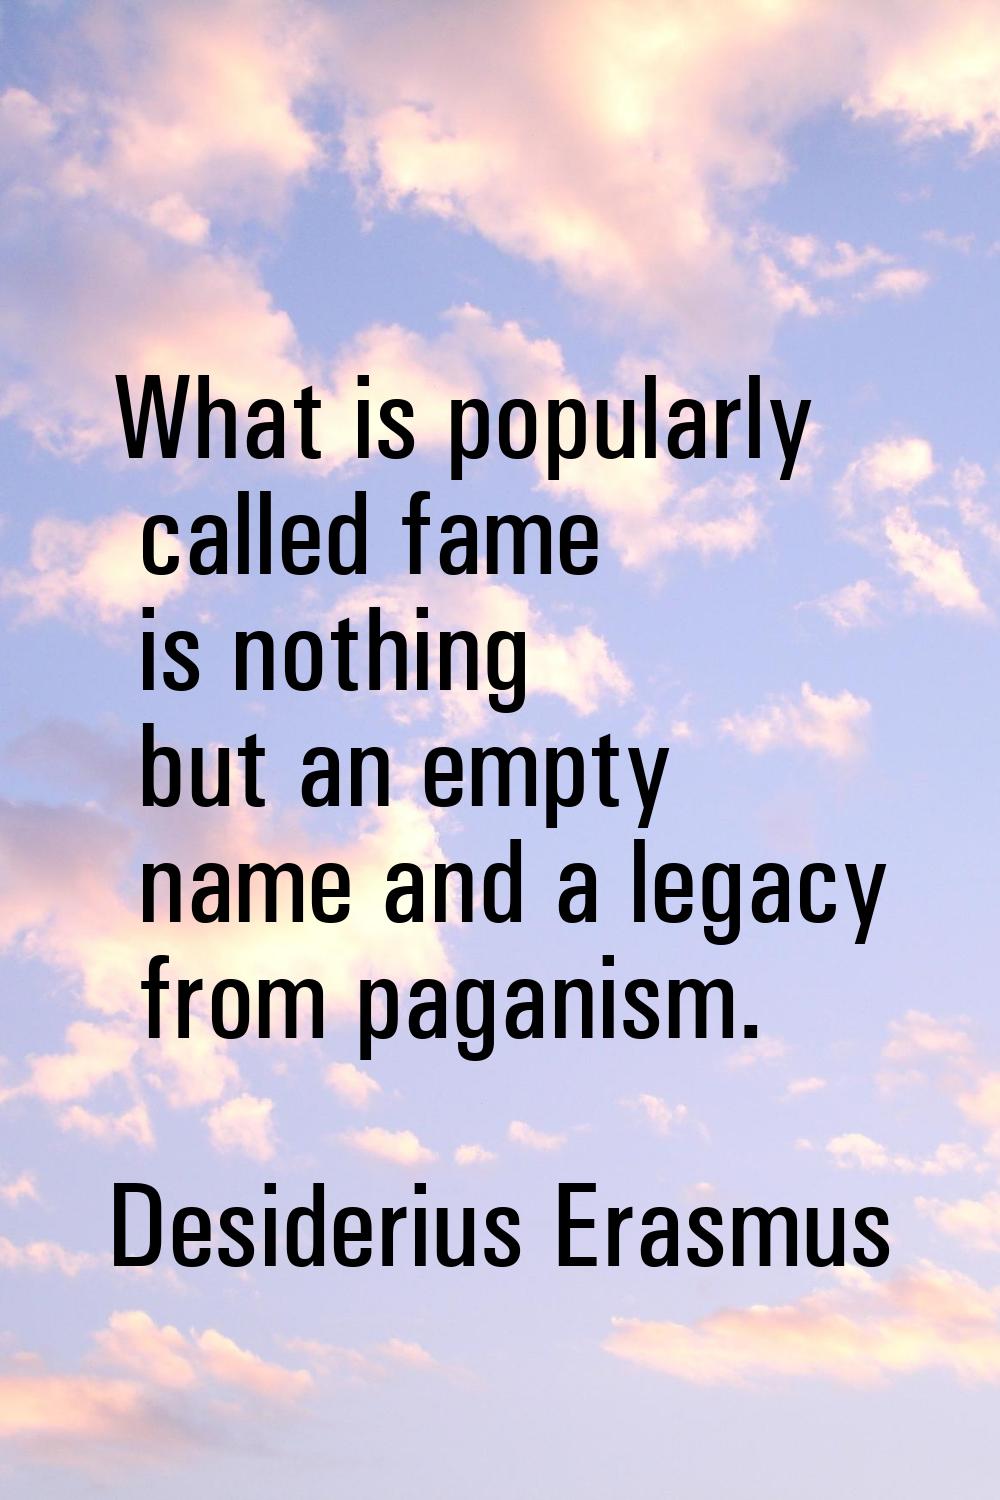 What is popularly called fame is nothing but an empty name and a legacy from paganism.